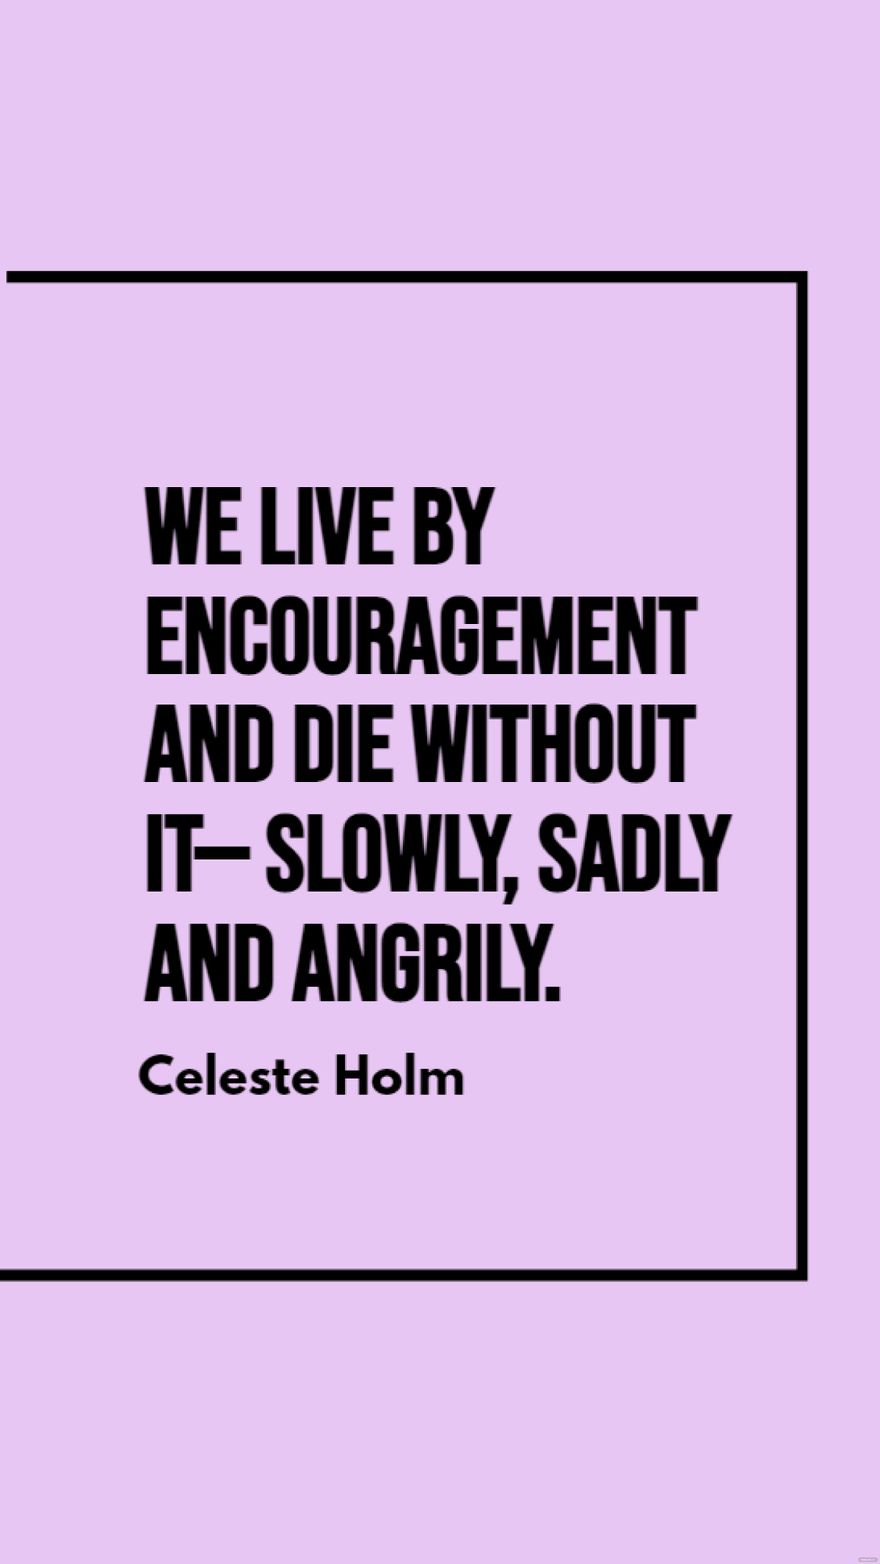 Celeste Holm - We live by encouragement and die without it - slowly, sadly and angrily.